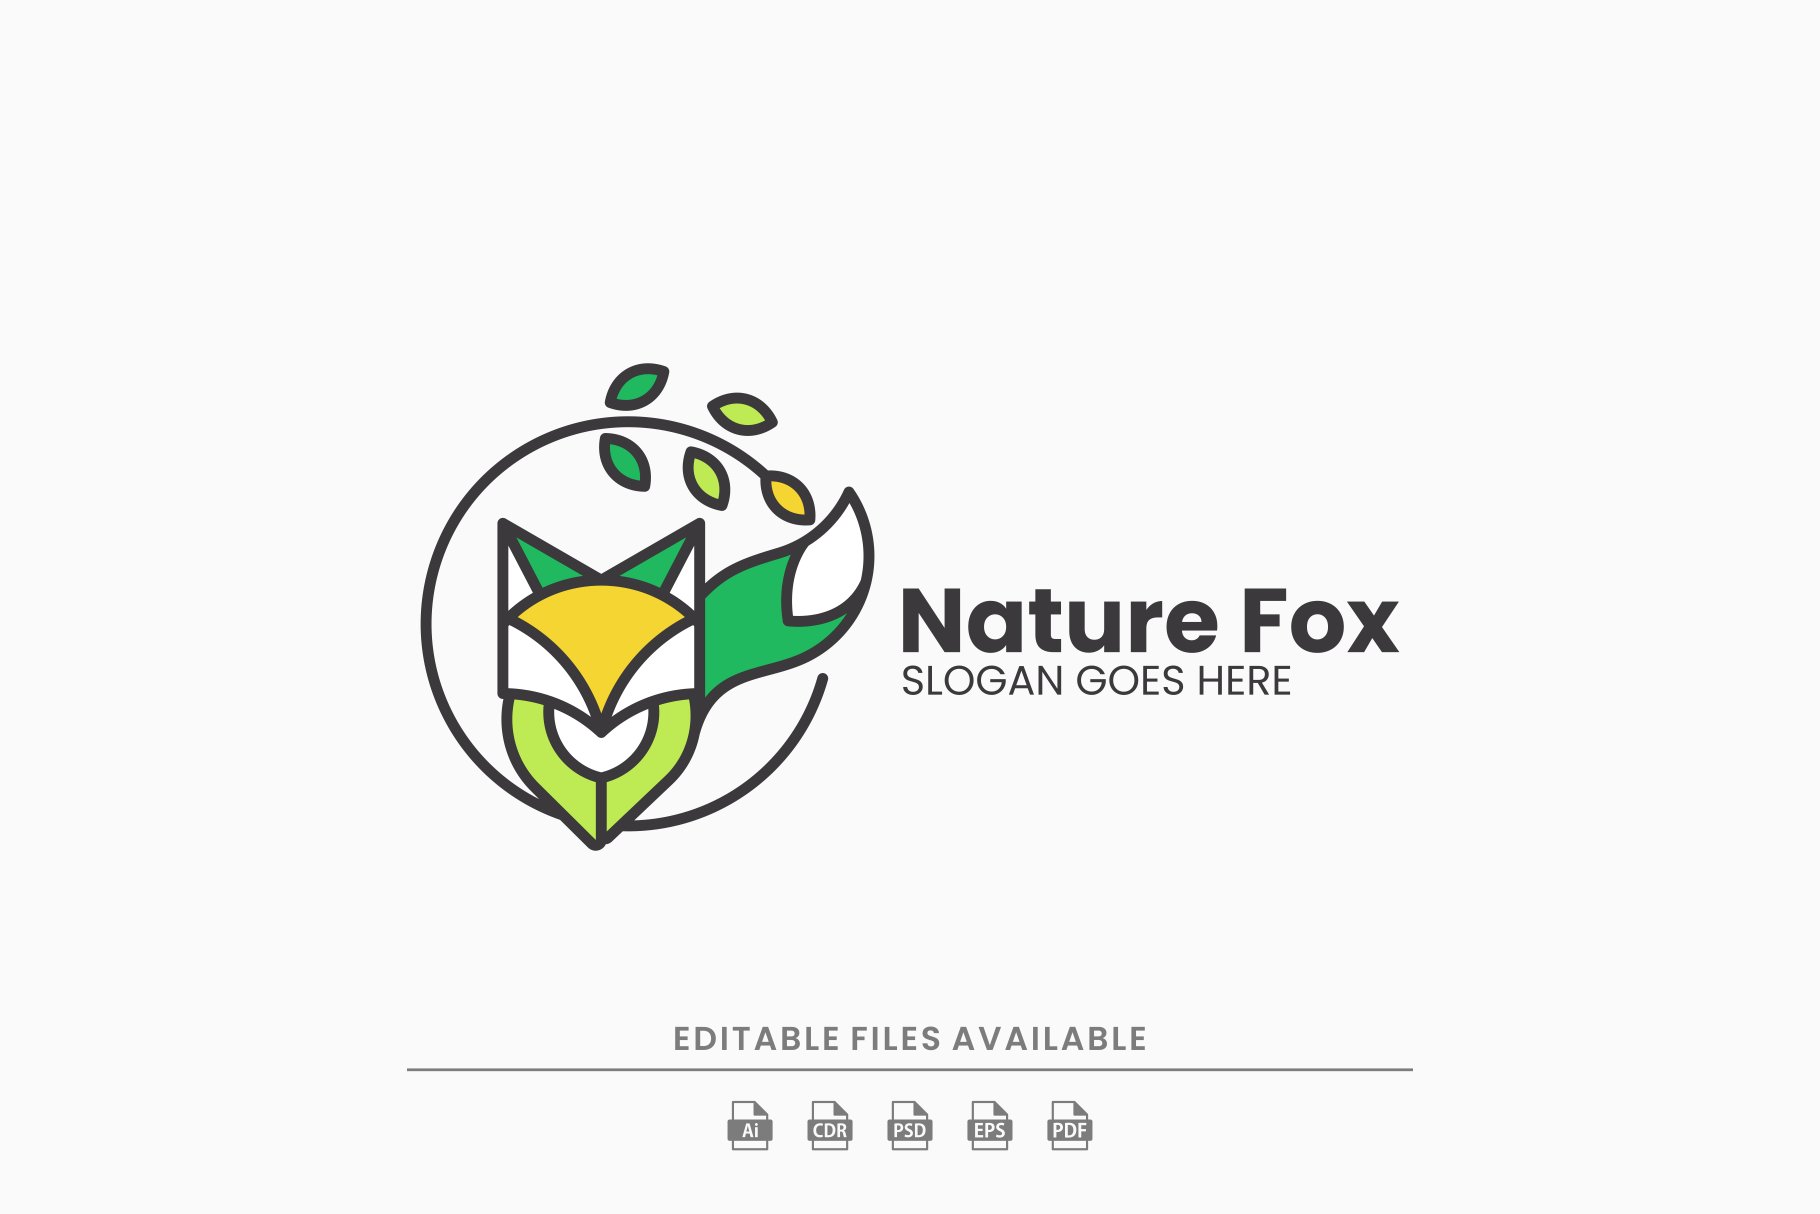 Nature Fox Simple Logo cover image.